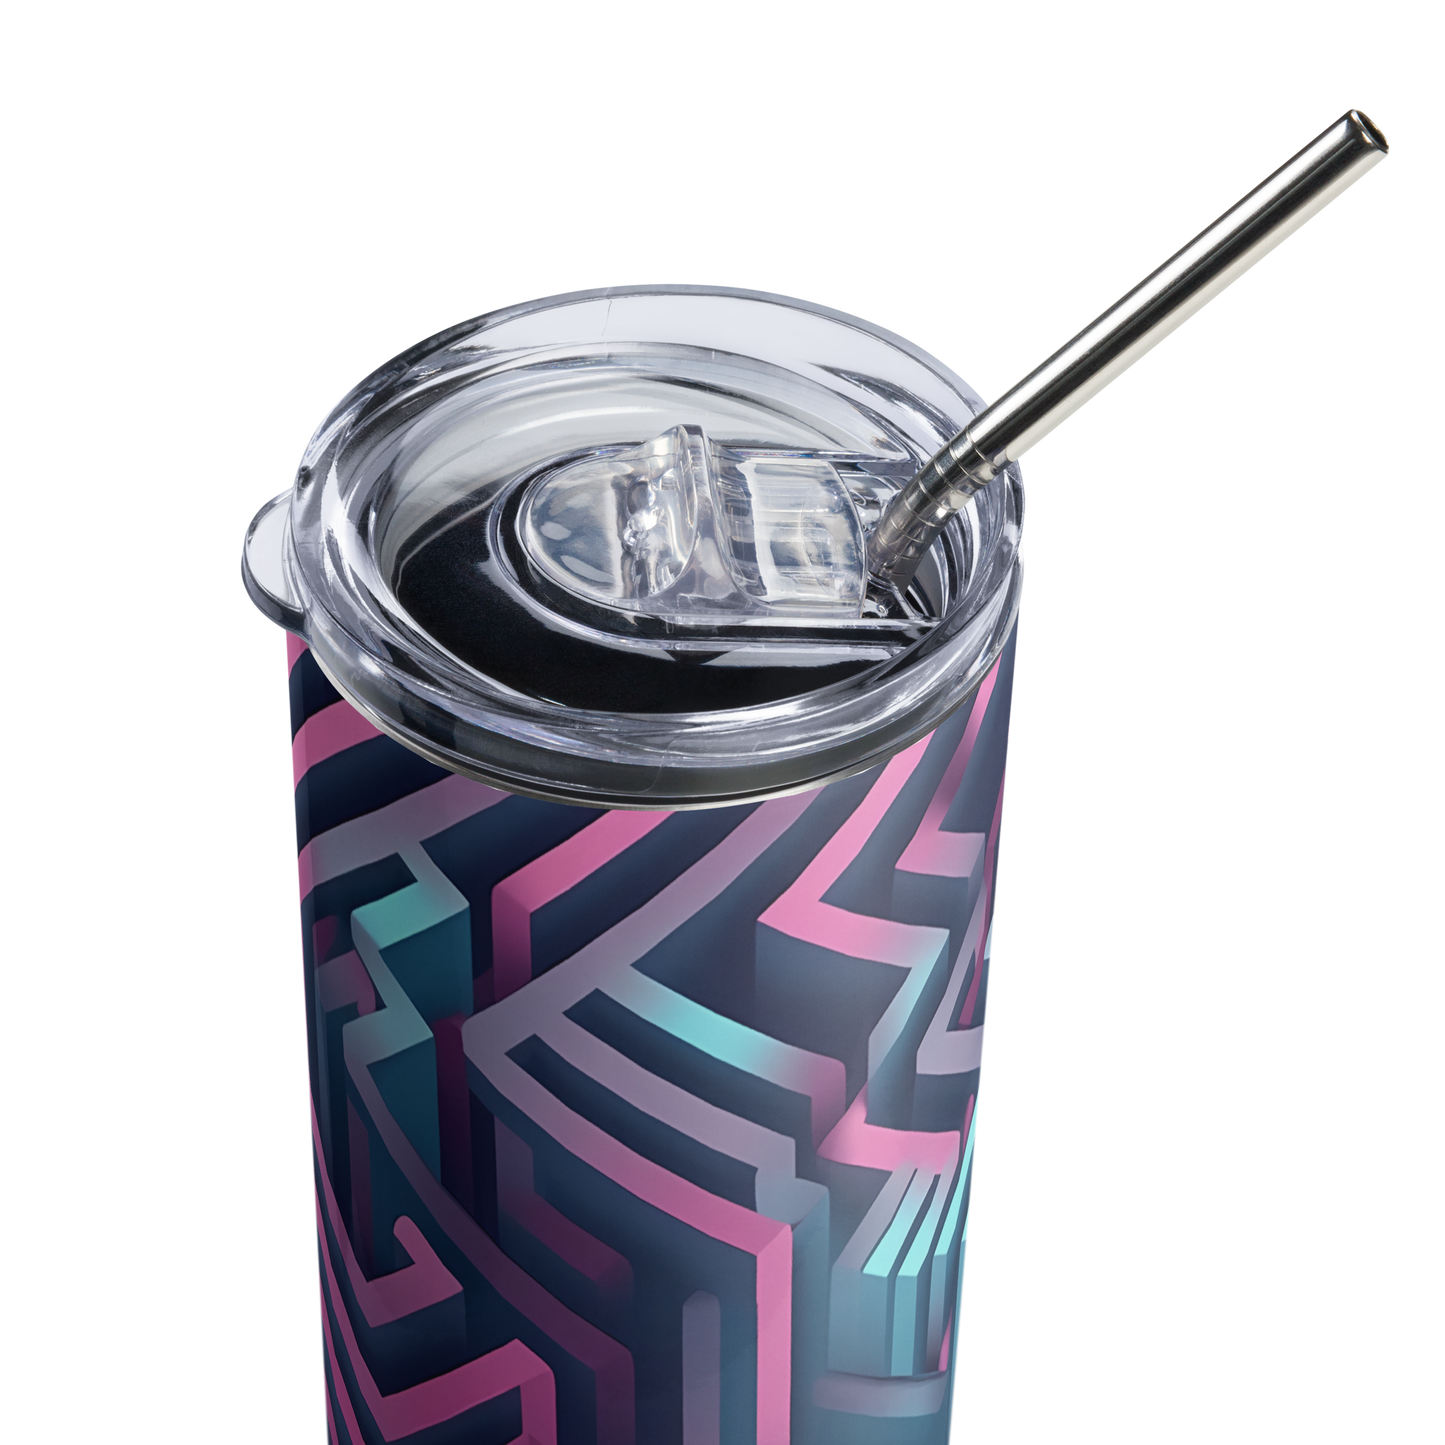 3D Maze Illusion | 3D Patterns | Stainless Steel Tumbler - #4